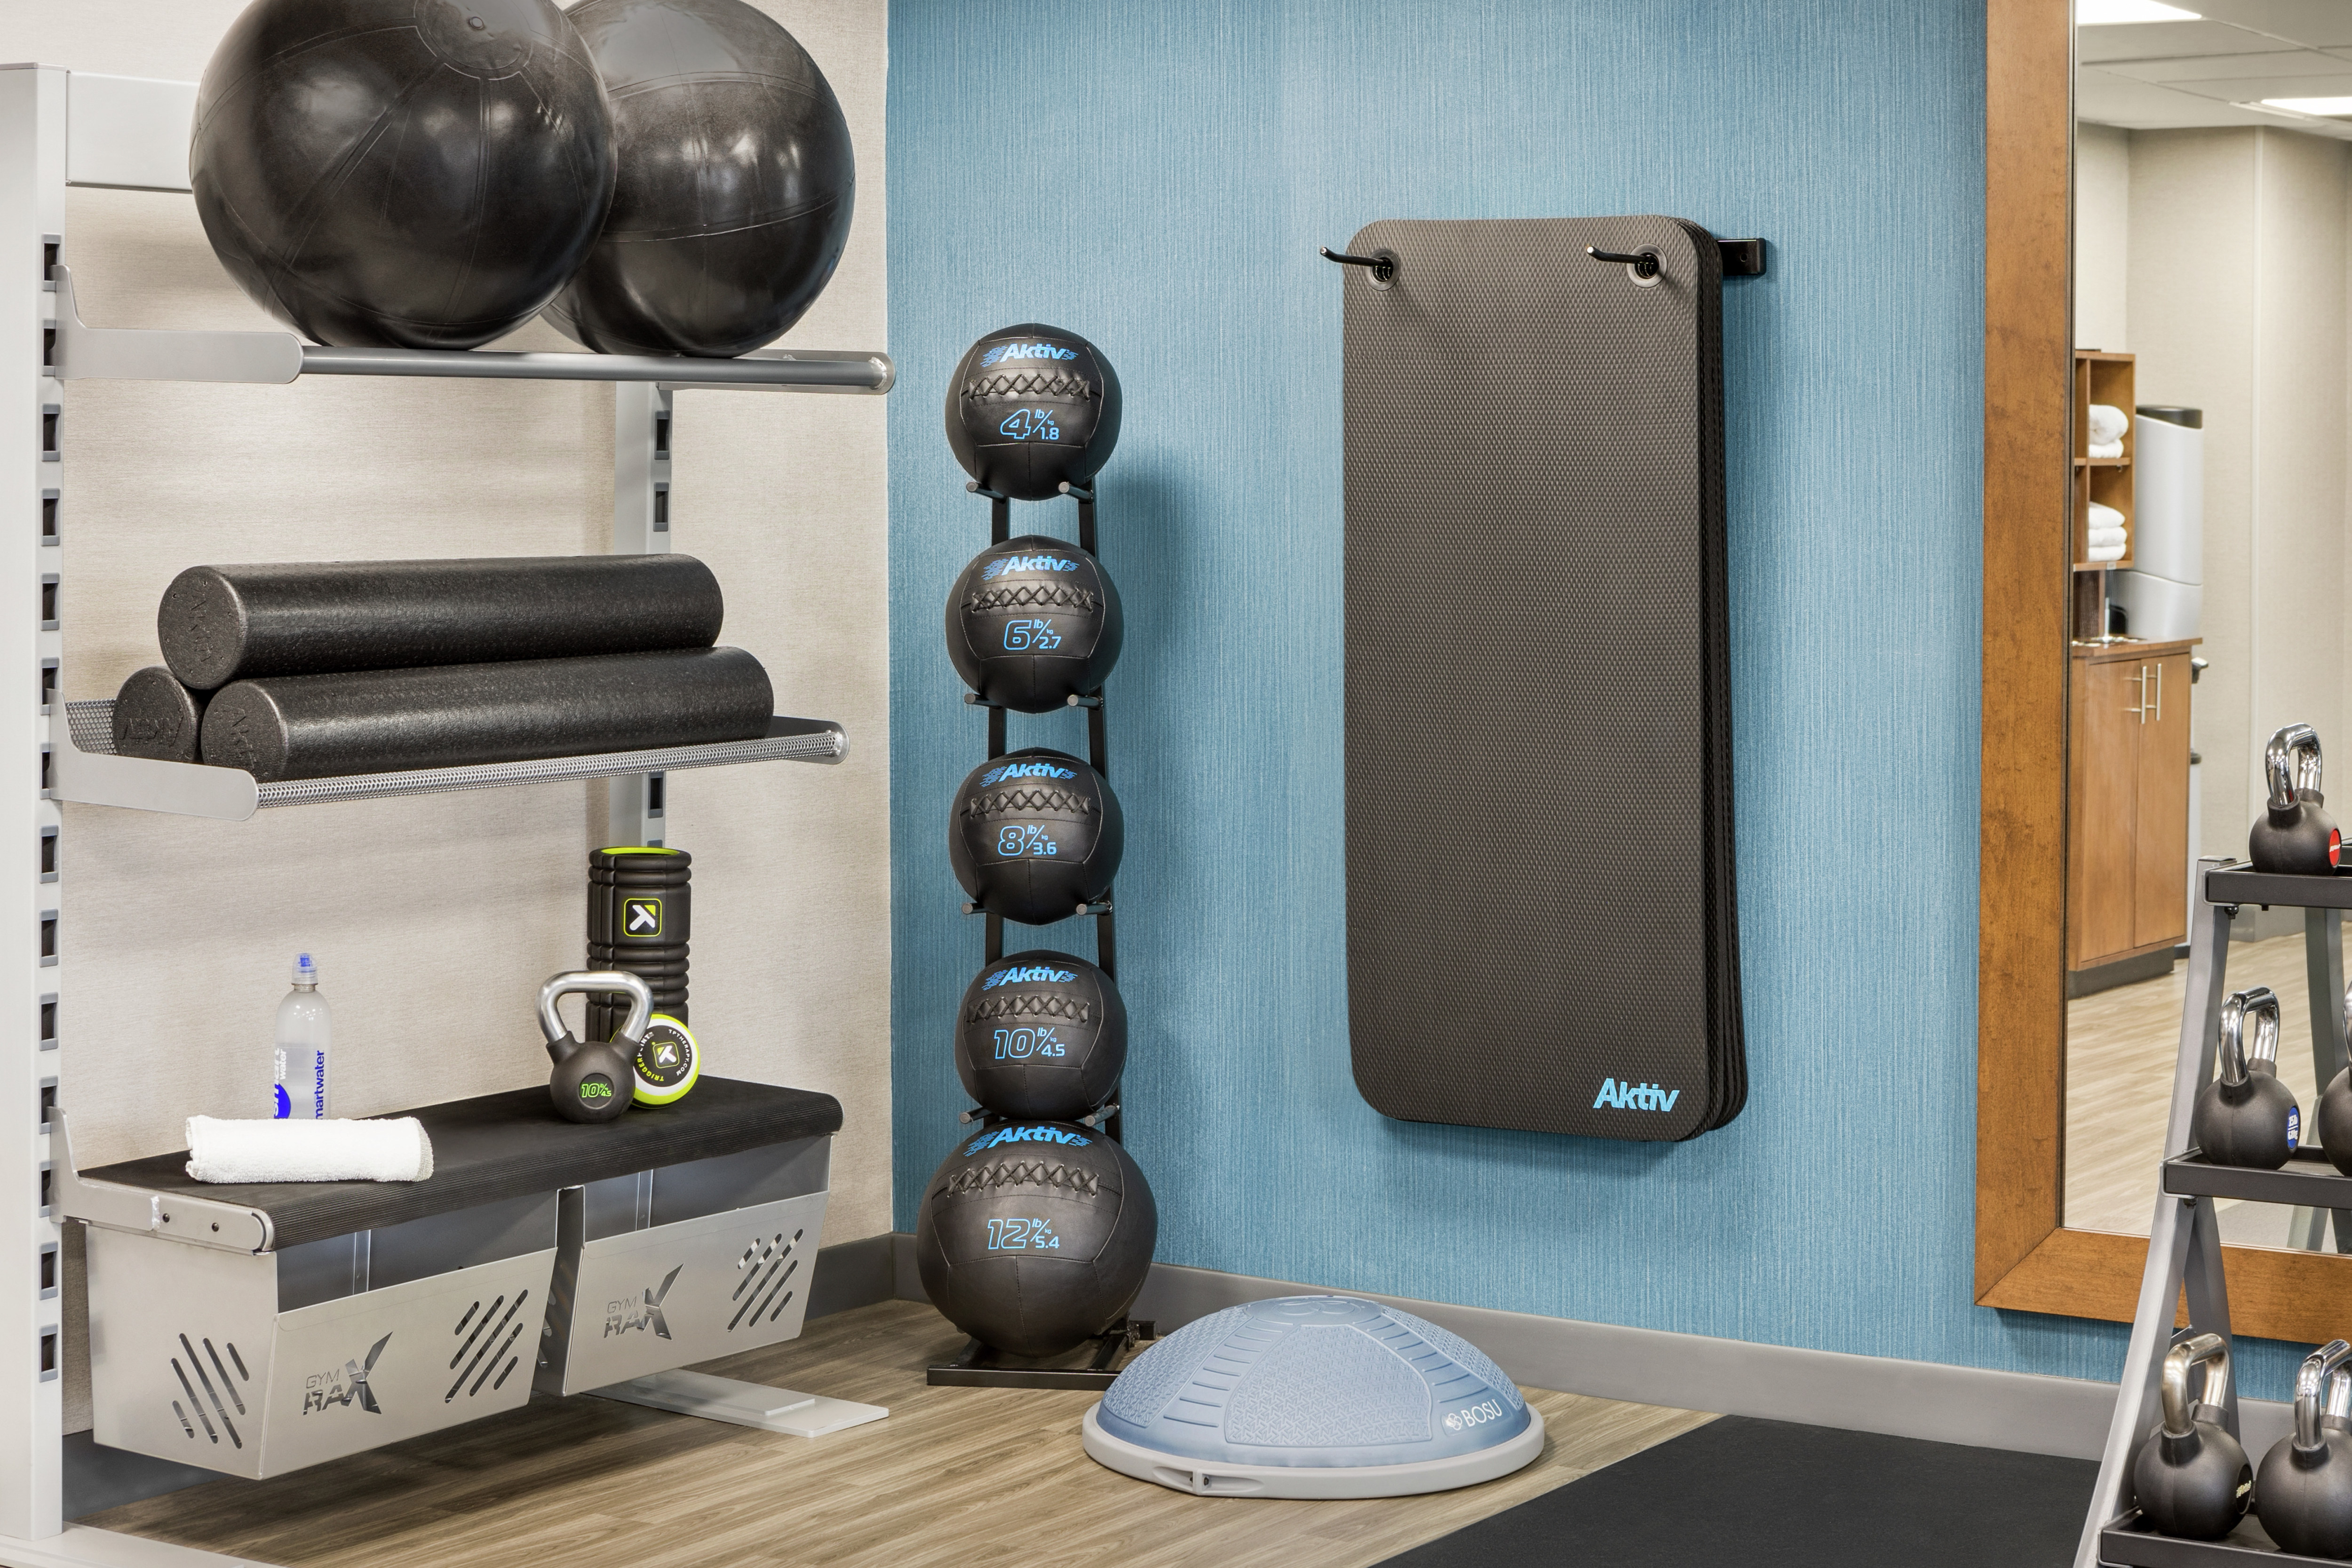 State of the art fitness center featuring an ample selection of exercise equipment